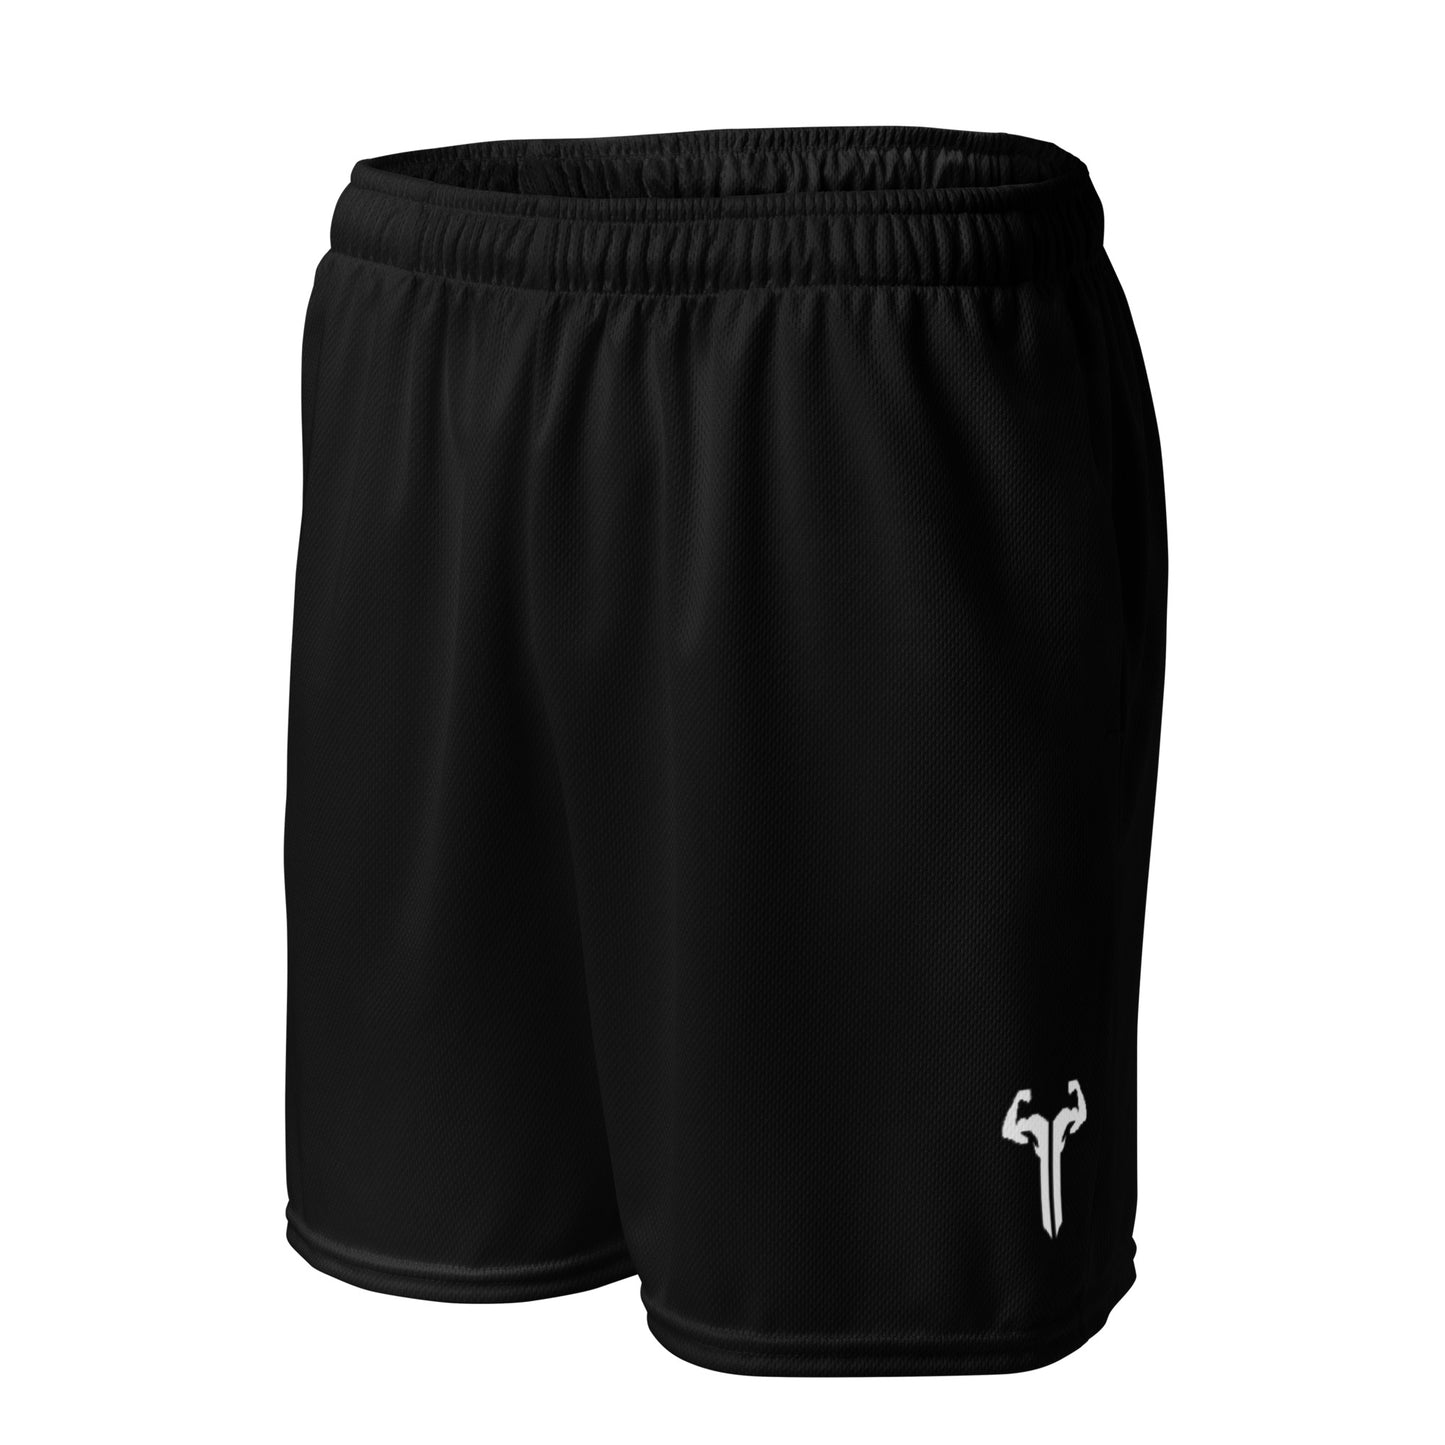 Shorts Fitness Masculino - Dry Fit